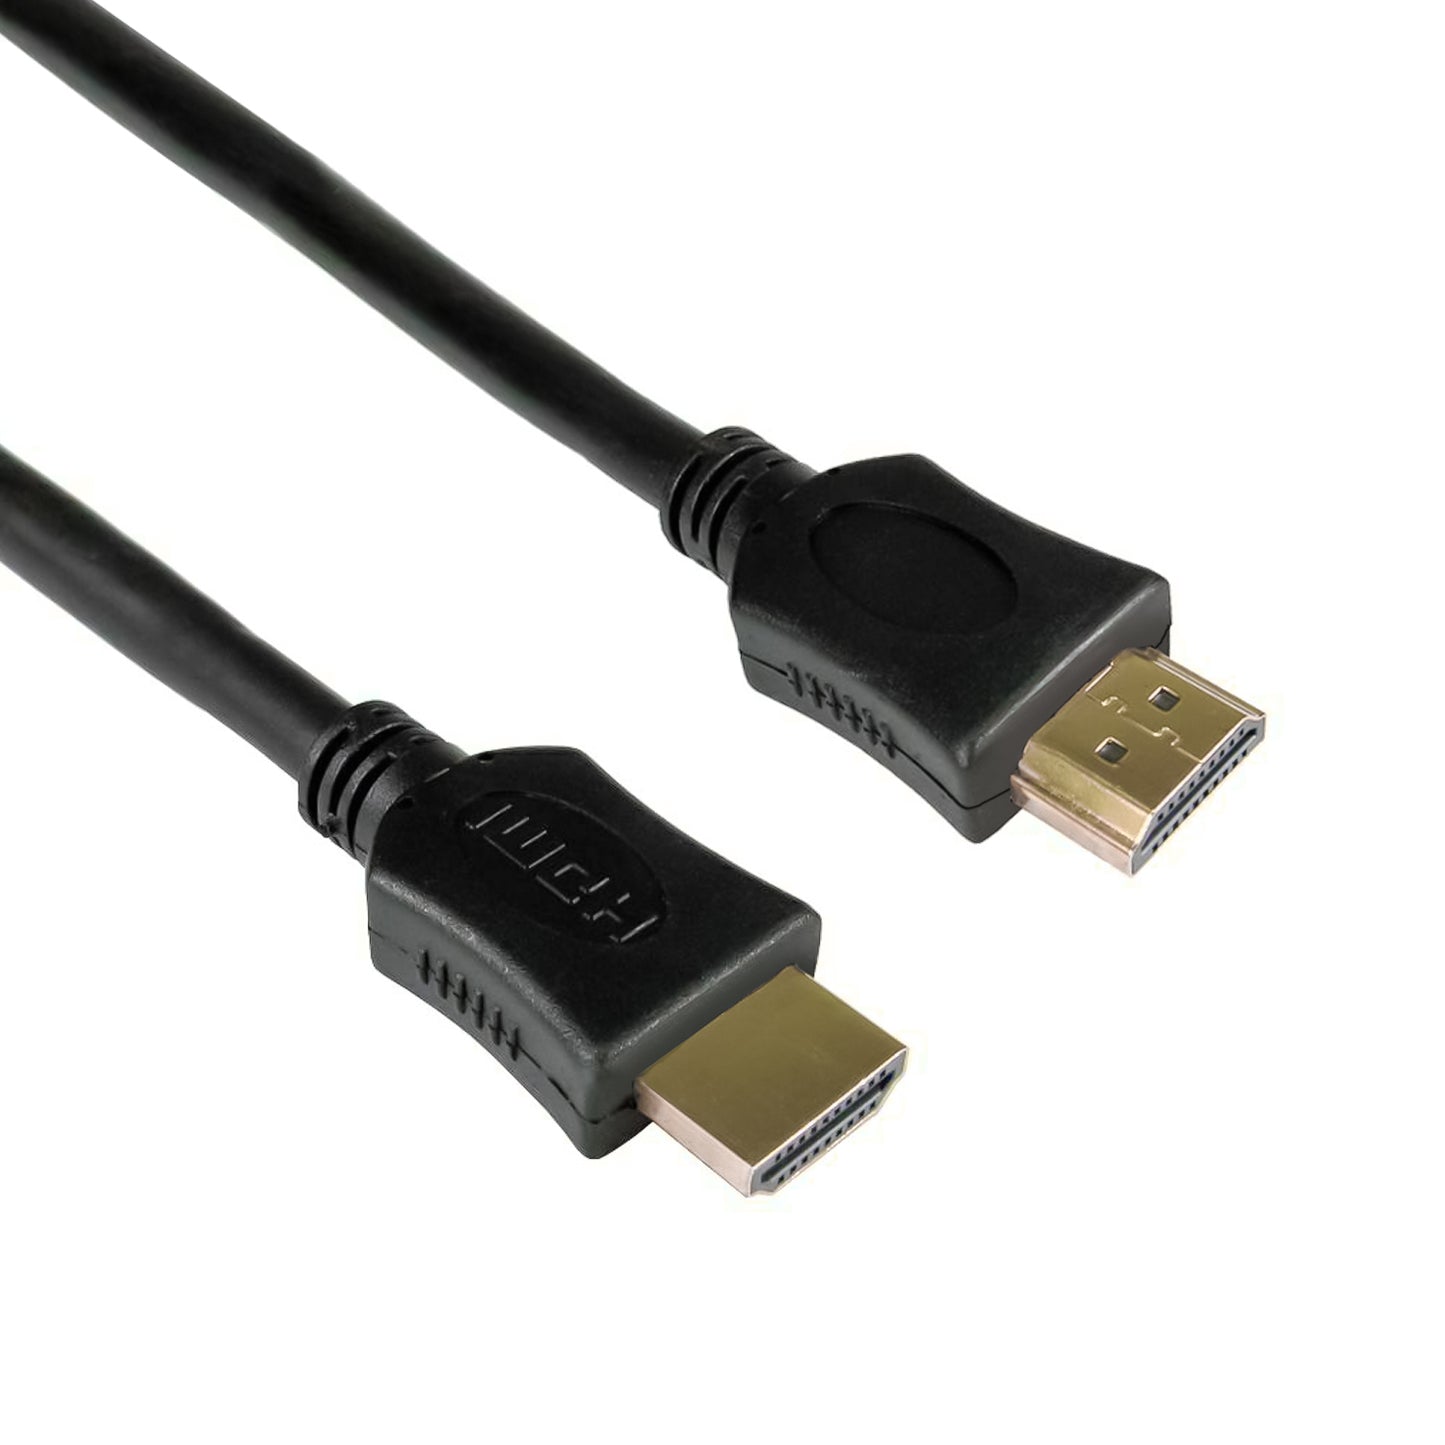 GBC 1.5 meter HDMI cable, supports 4K UHD at 60Hz, high speed 18Gbps with ethernet, gold-plated connectors